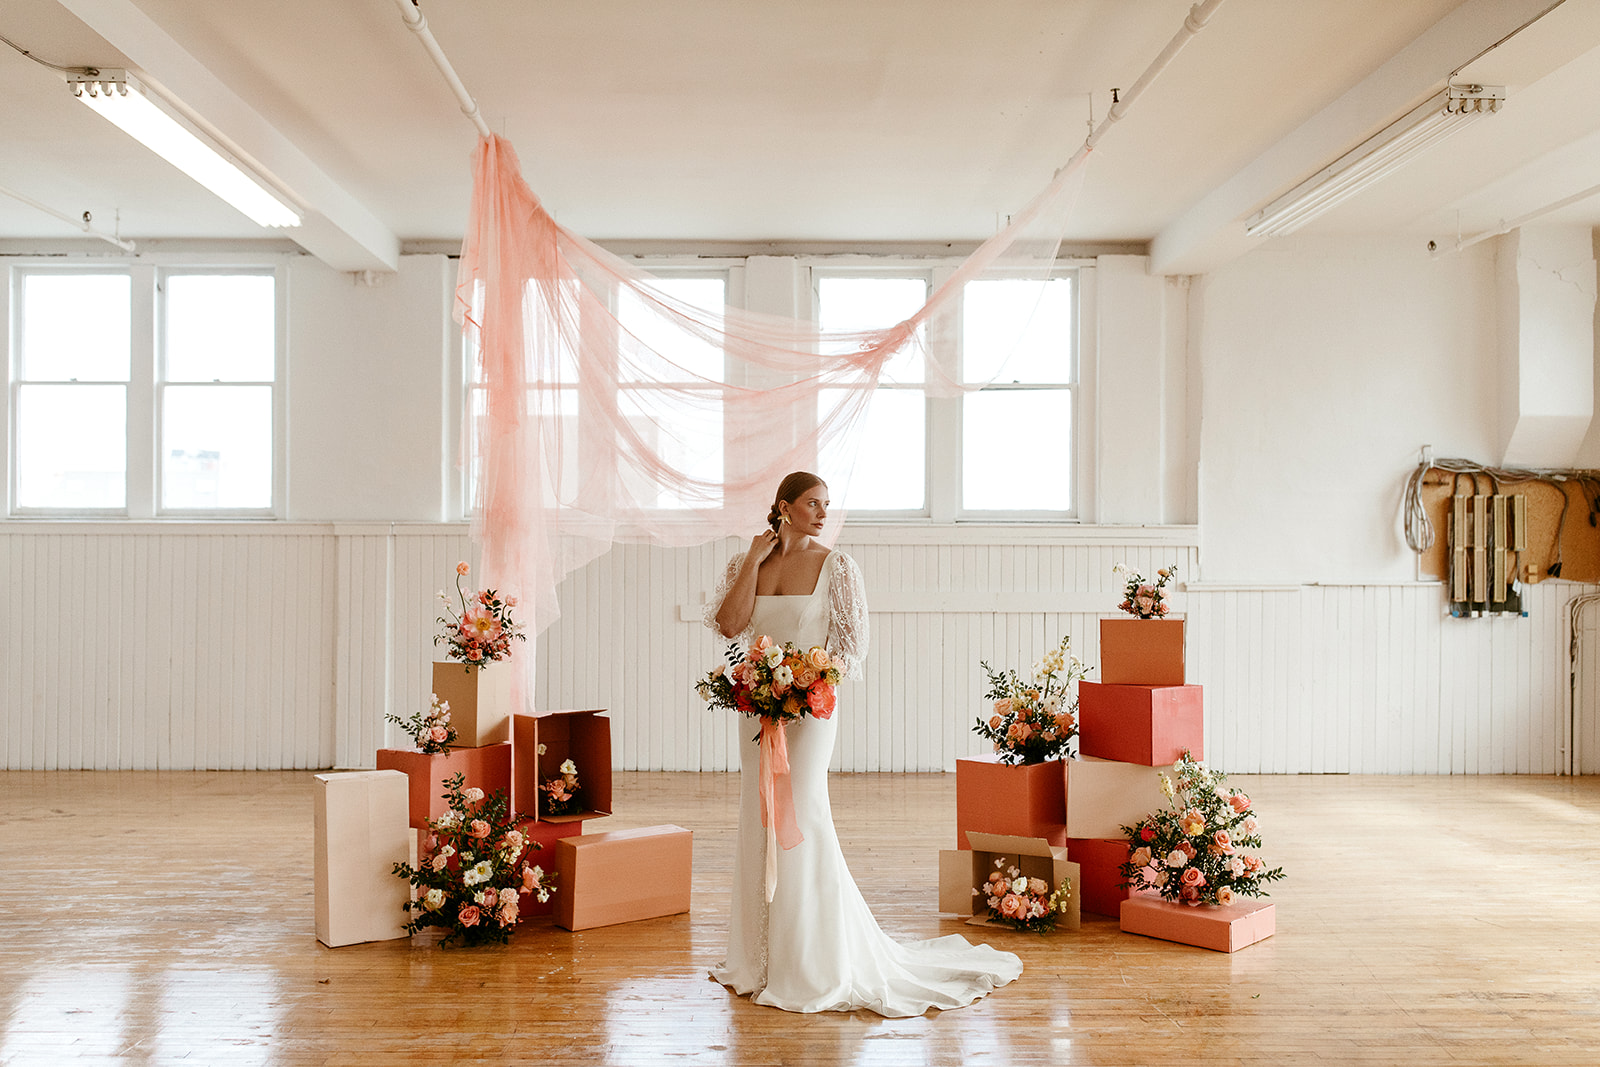 Citrus editorial with boho bridal style featuring hanging fabric installation for this unique DIY ceremony